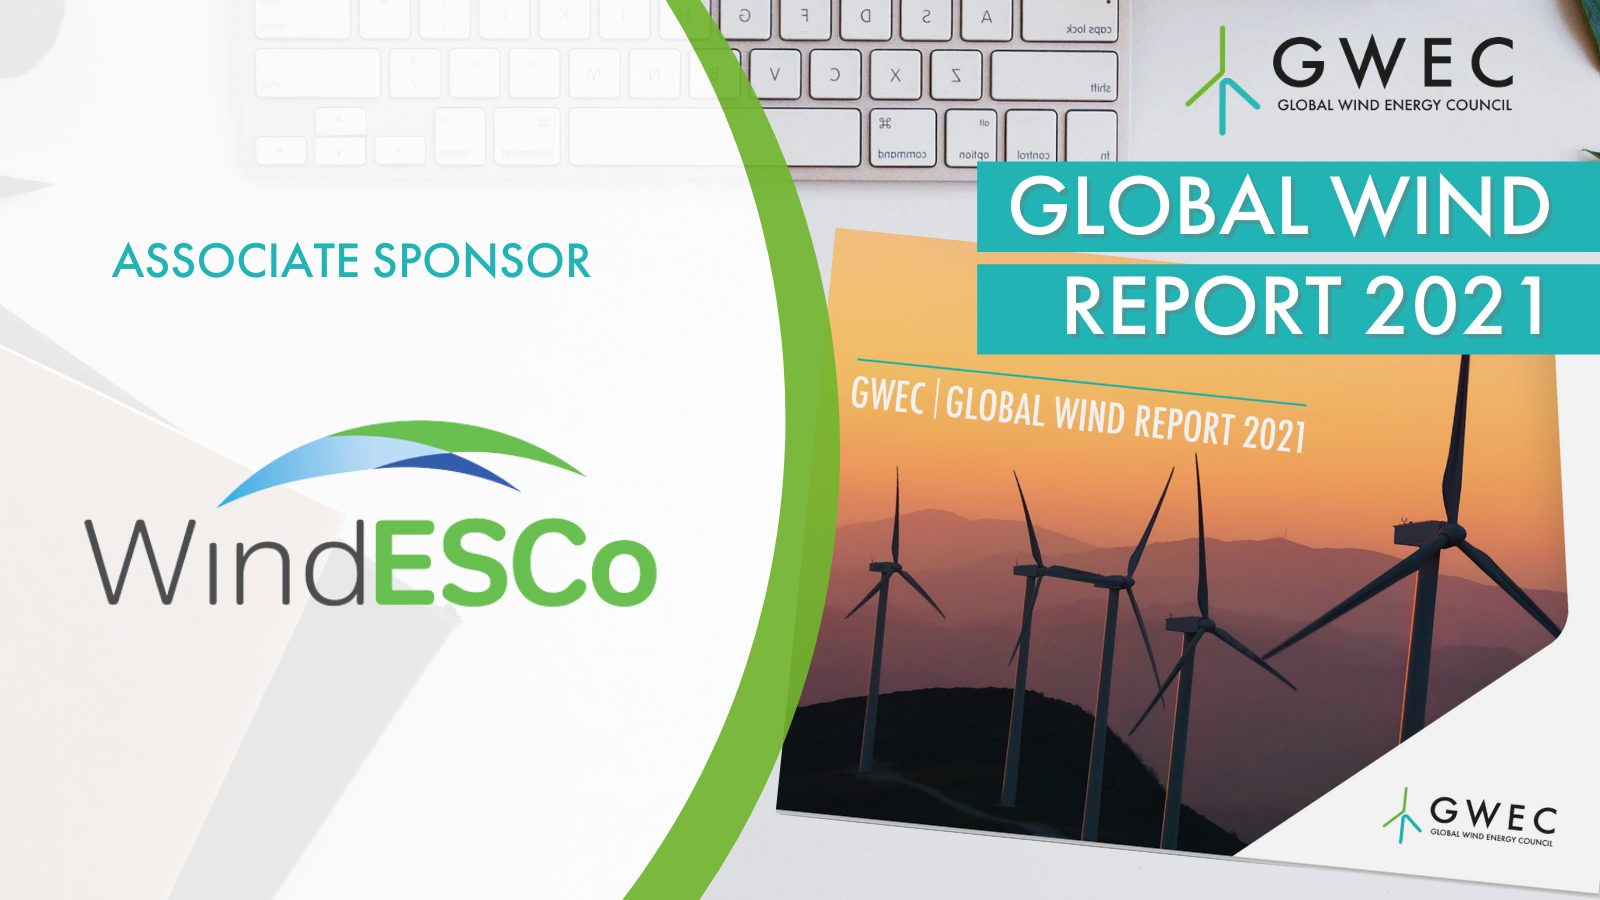 GWEC Releases 2021 Global Wind Report